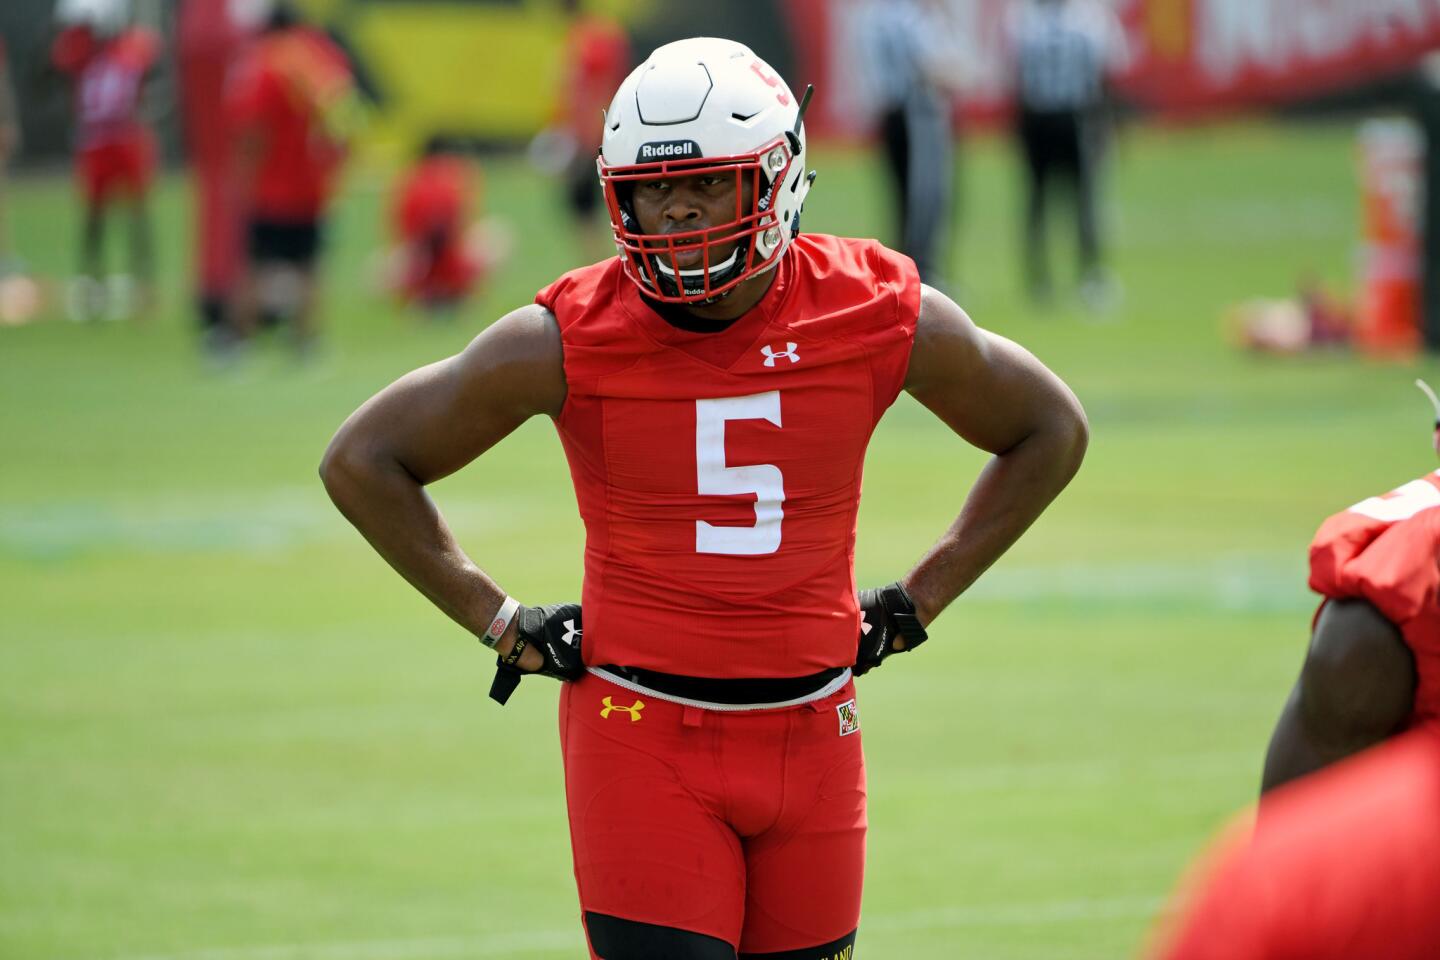 Shaq Smith, University of Maryland LB, at the Terps training camp on media day.